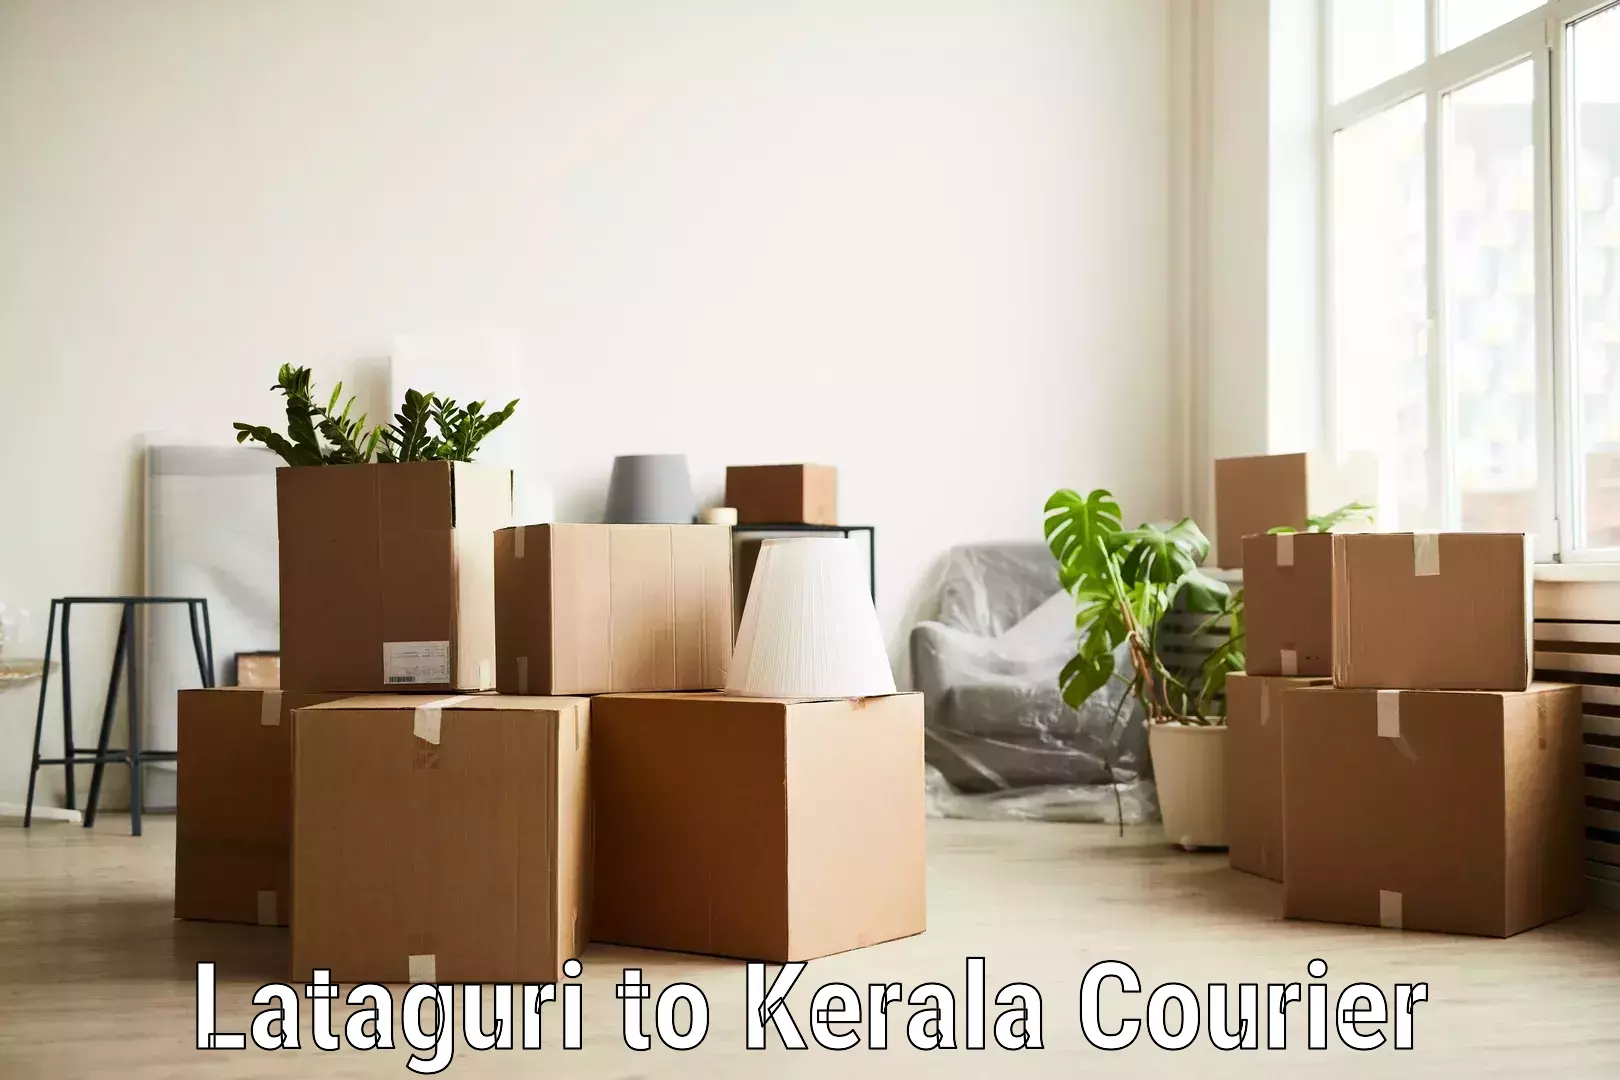 Global parcel delivery Lataguri to Cochin University of Science and Technology